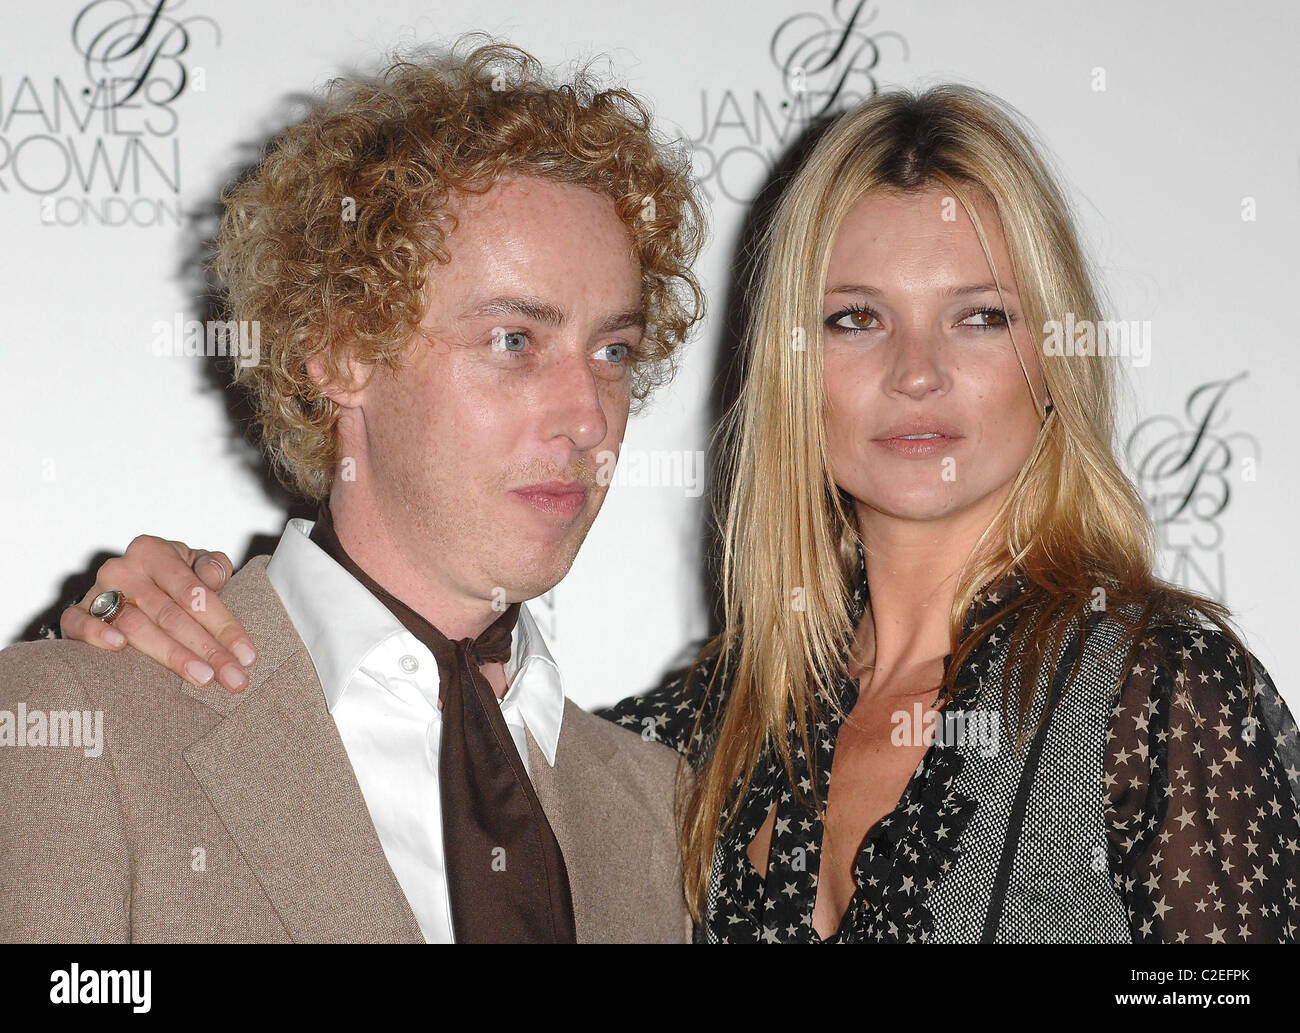 James Brown and Kate Moss Launch of James Brown London haircare range at Boots London, England - 10.10.07 : Stock Photo